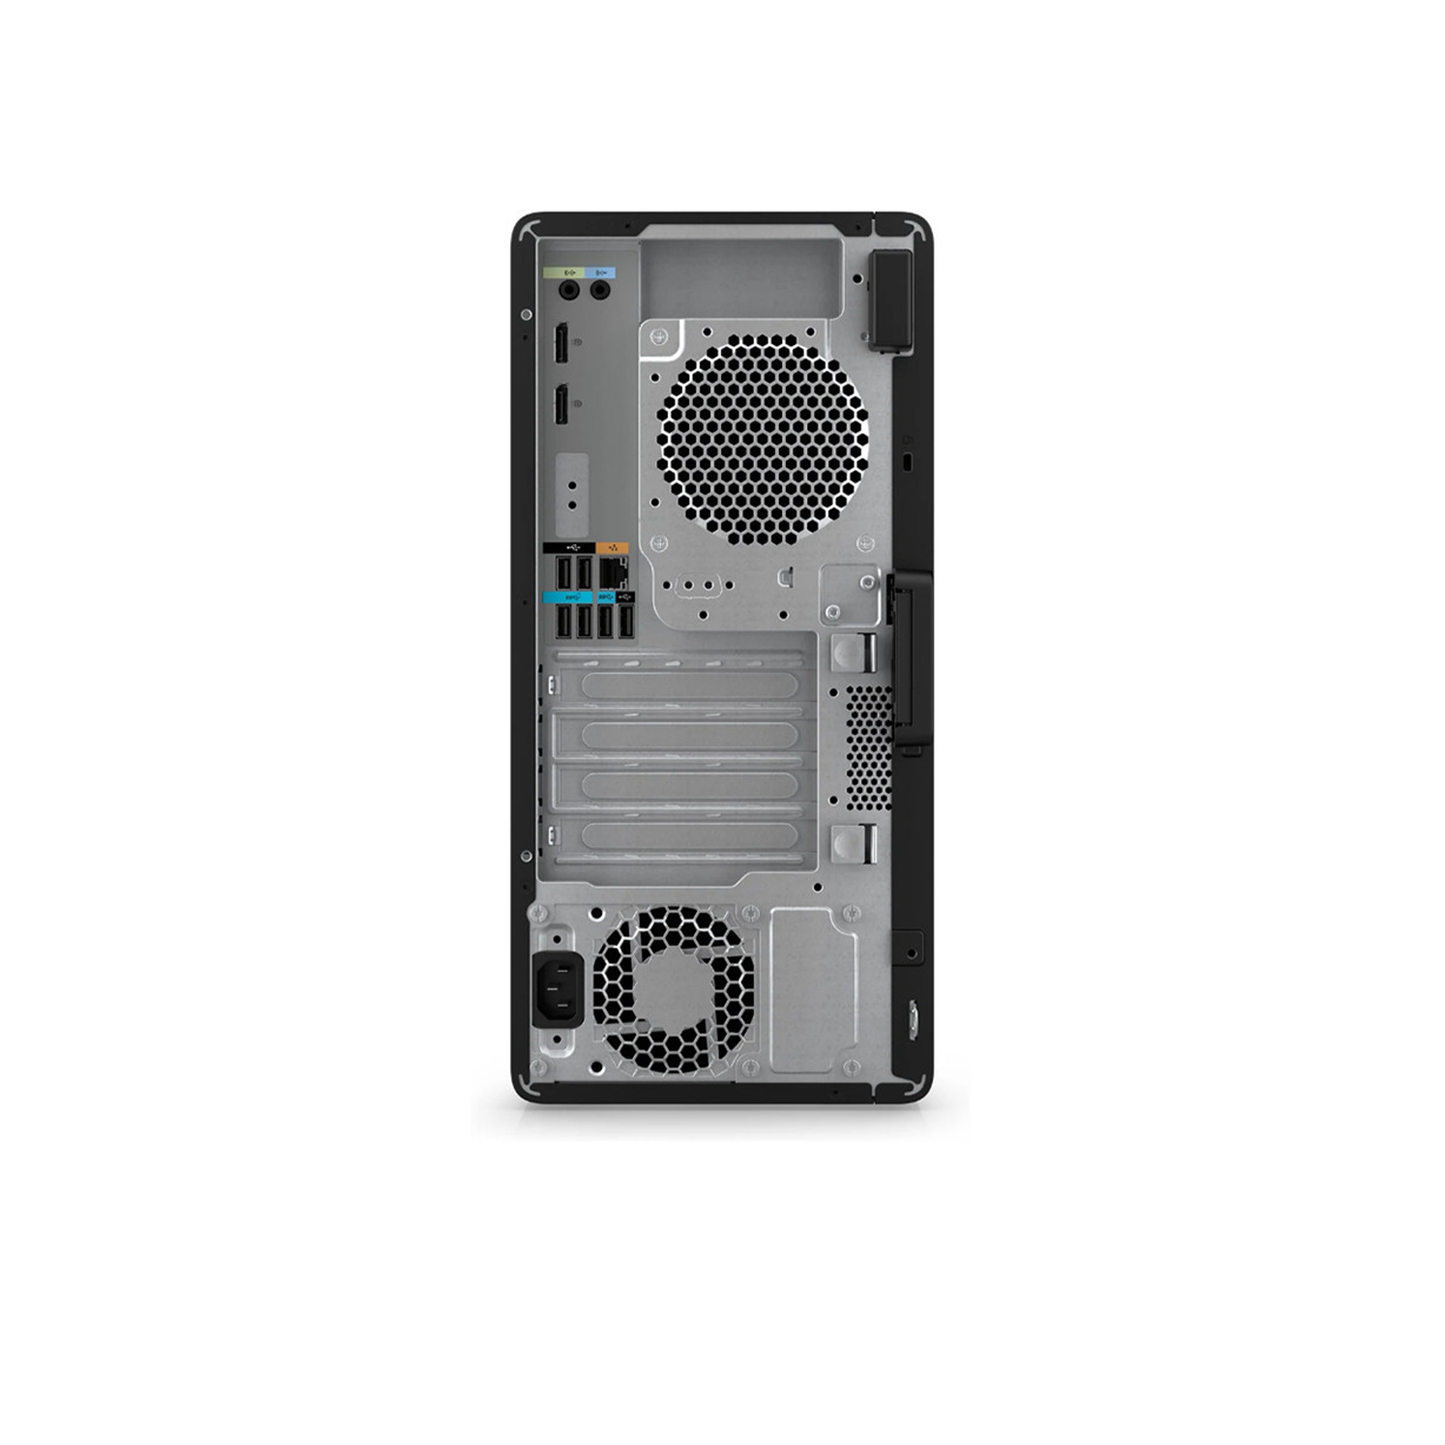 HP Z2 Tower G9 Workstation Wolf Pro Security Edition